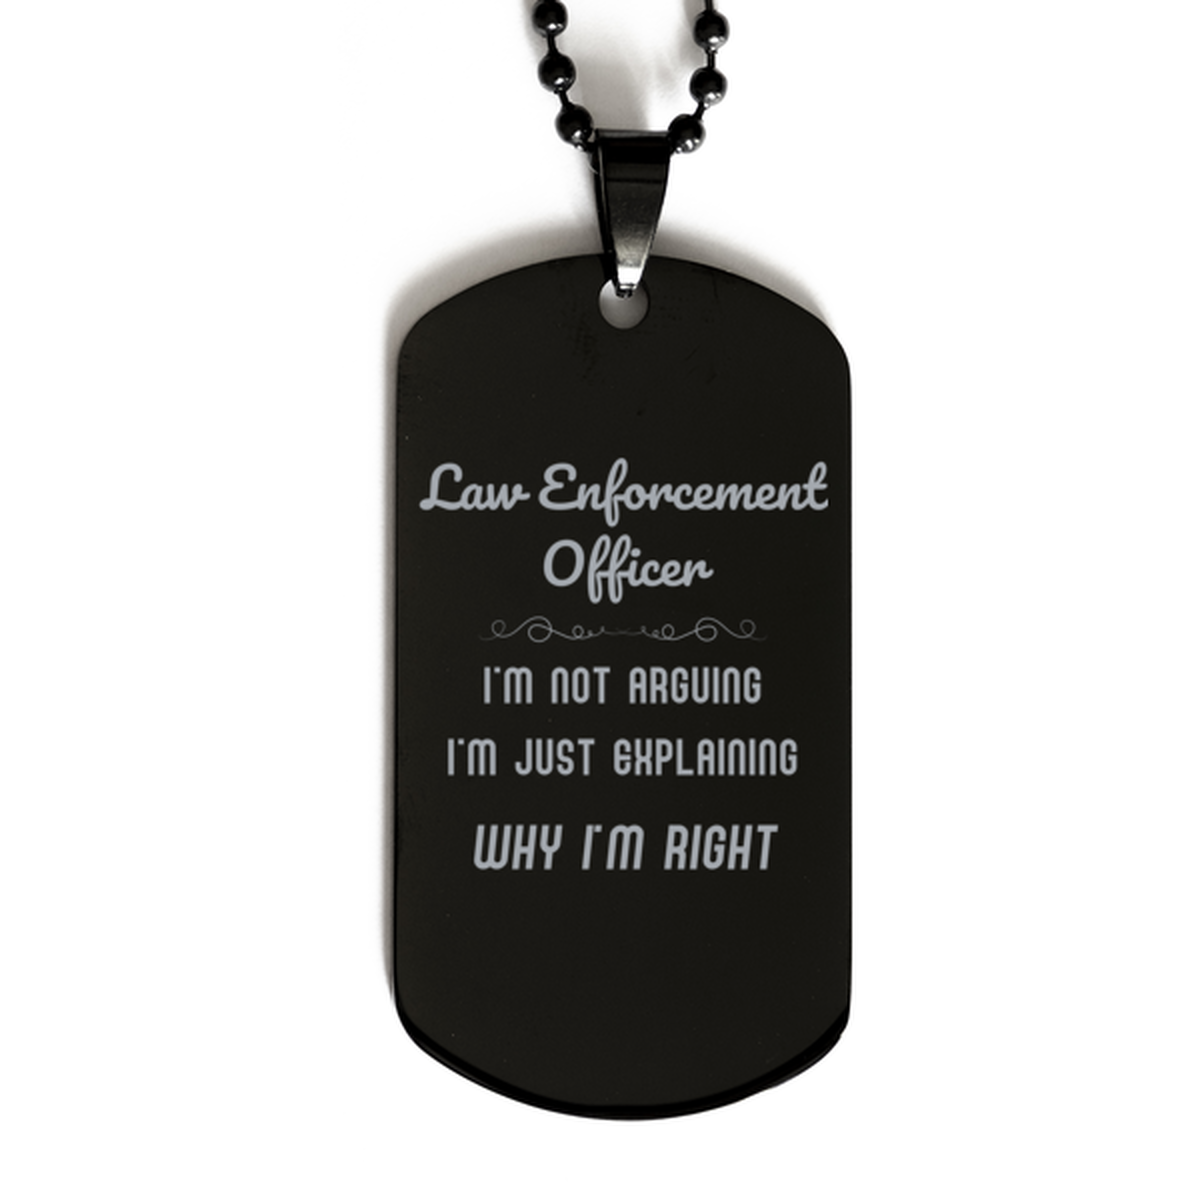 Law Enforcement Officer I'm not Arguing. I'm Just Explaining Why I'm RIGHT Black Dog Tag, Funny Saying Quote Law Enforcement Officer Gifts For Law Enforcement Officer Graduation Birthday Christmas Gifts for Men Women Coworker